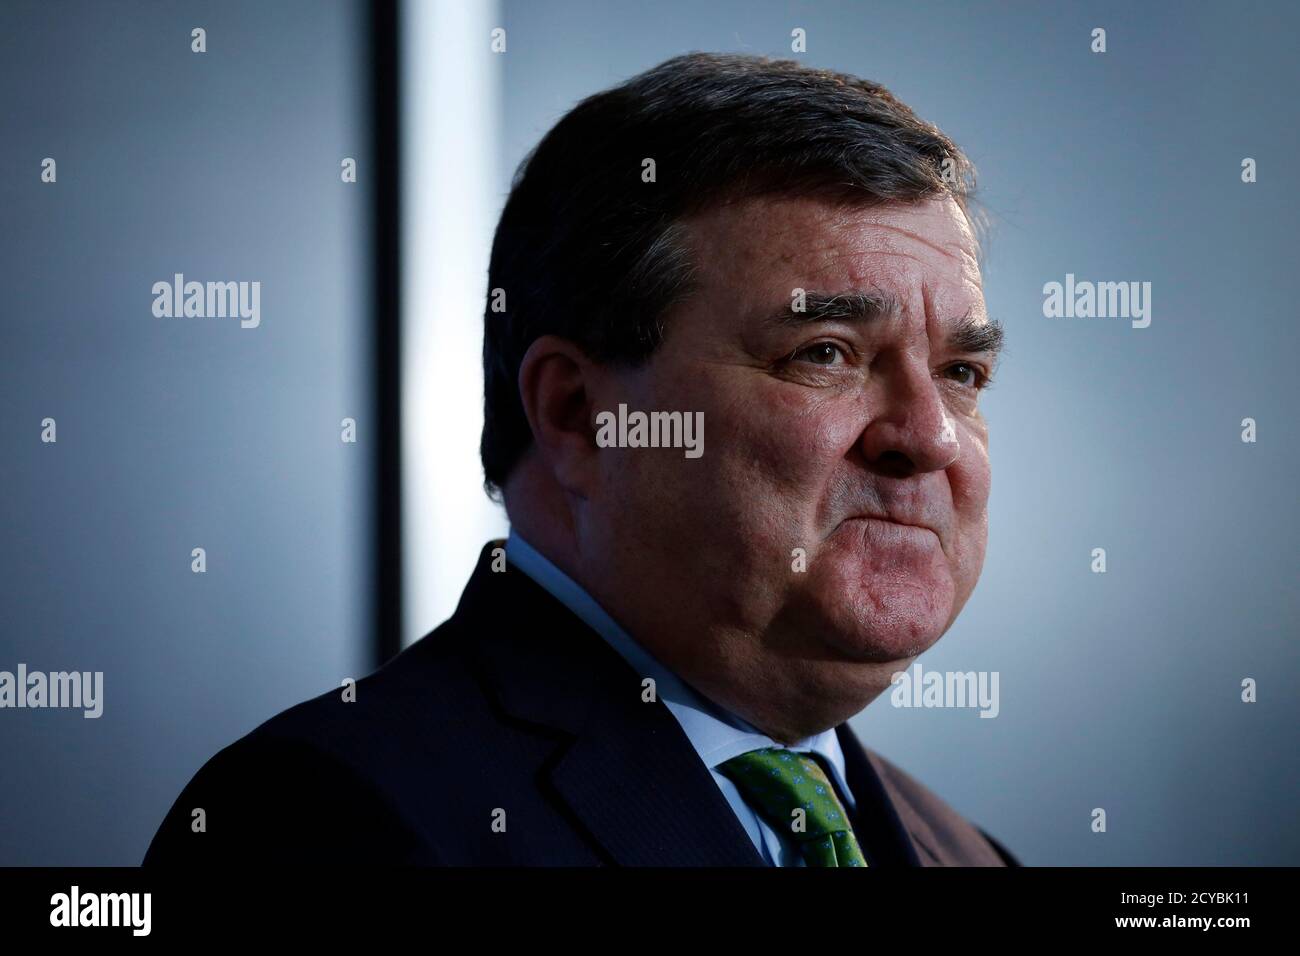 Canada's Finance Minister Jim Flaherty listens to a question during a news conference in Ottawa March 1, 2013. The slowing Canadian economy means the government will have lower revenues than it initially forecast as it draws up the next budget, which is due soon, Flaherty said on Friday. REUTERS/Chris Wattie (CANADA - Tags: POLITICS BUSINESS) Stock Photo